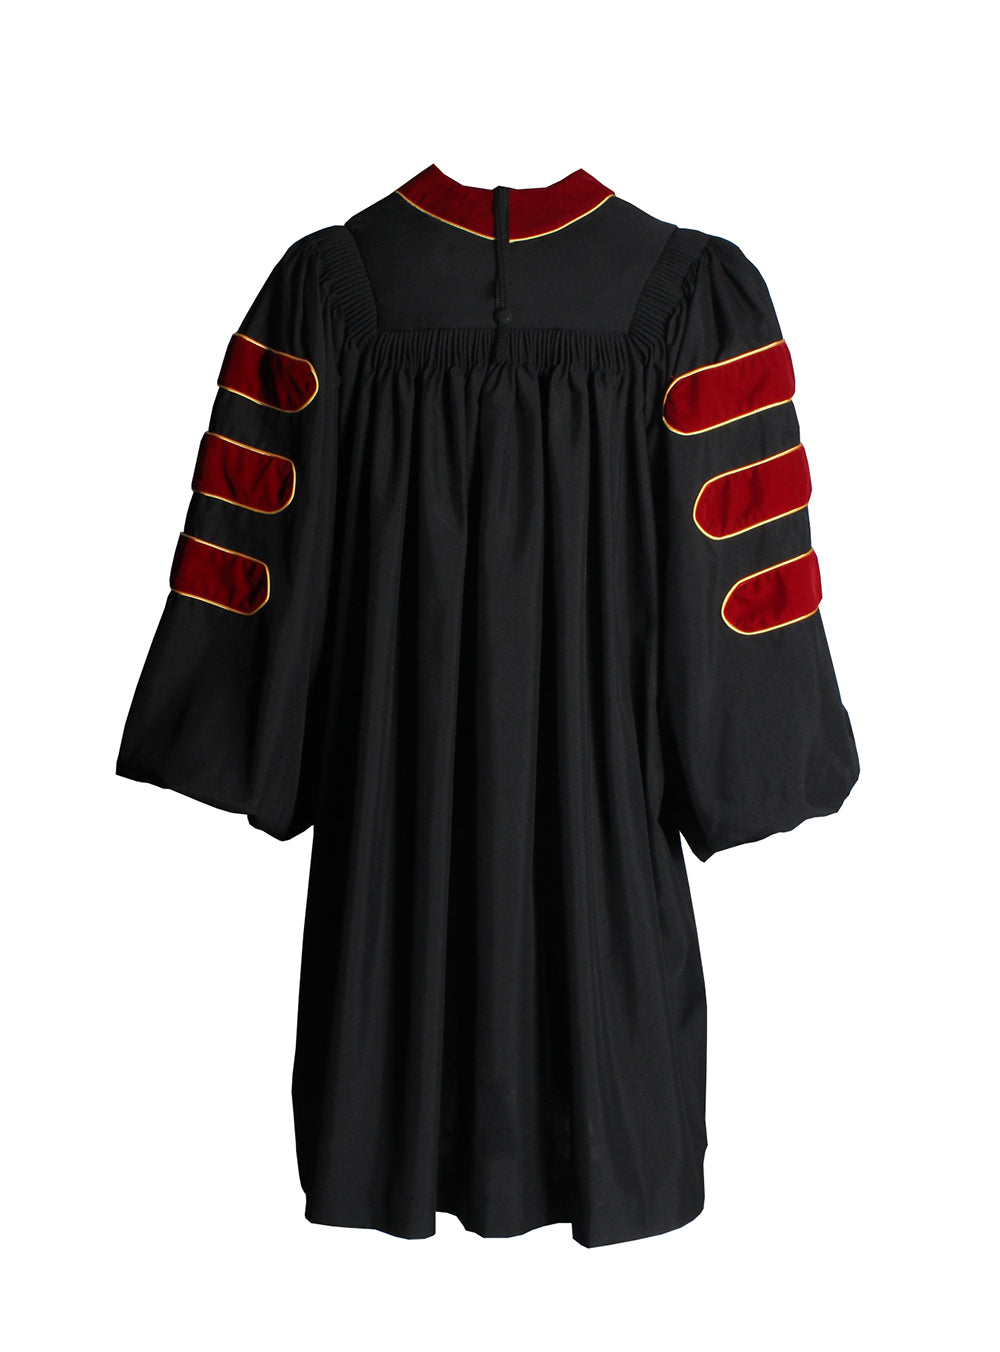 KUI Doctoral Cap and Gown Package - Deluxe Scarlet Doctoral Gown w/Gold Piping + Doctoral Hood w/ Scarlet Velvet Maroon Lining and White Chevron + 8 Sided Black Velvet Doctoral Tam